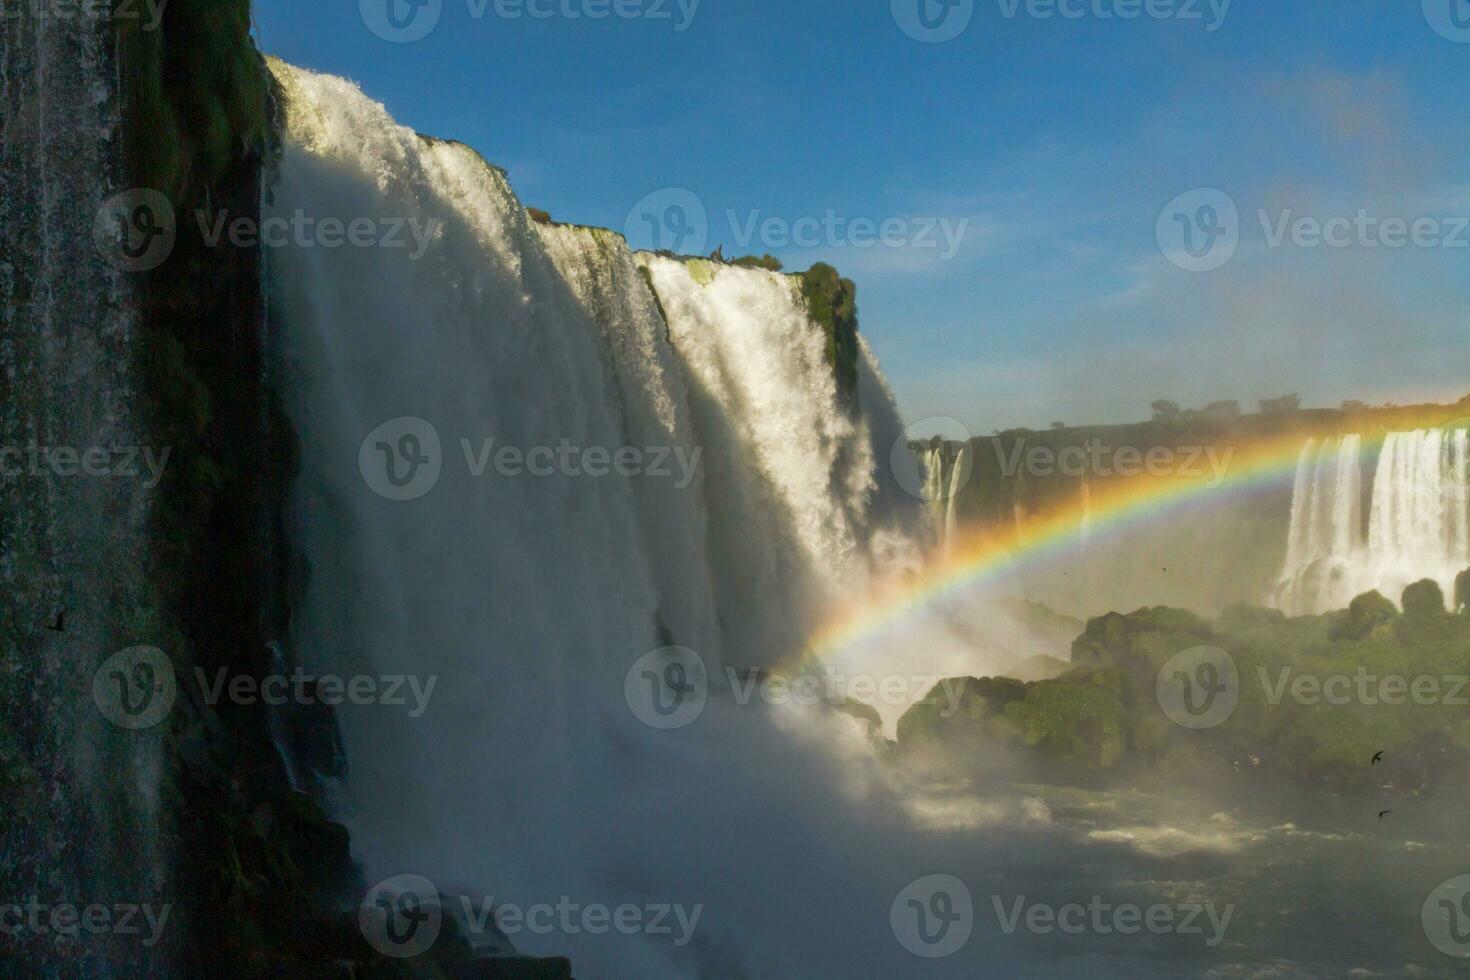 Iguazu Falls on the border between Argentina and Brazil with beautiful rainbows and lots of vegetation and lots of water falling down them photo